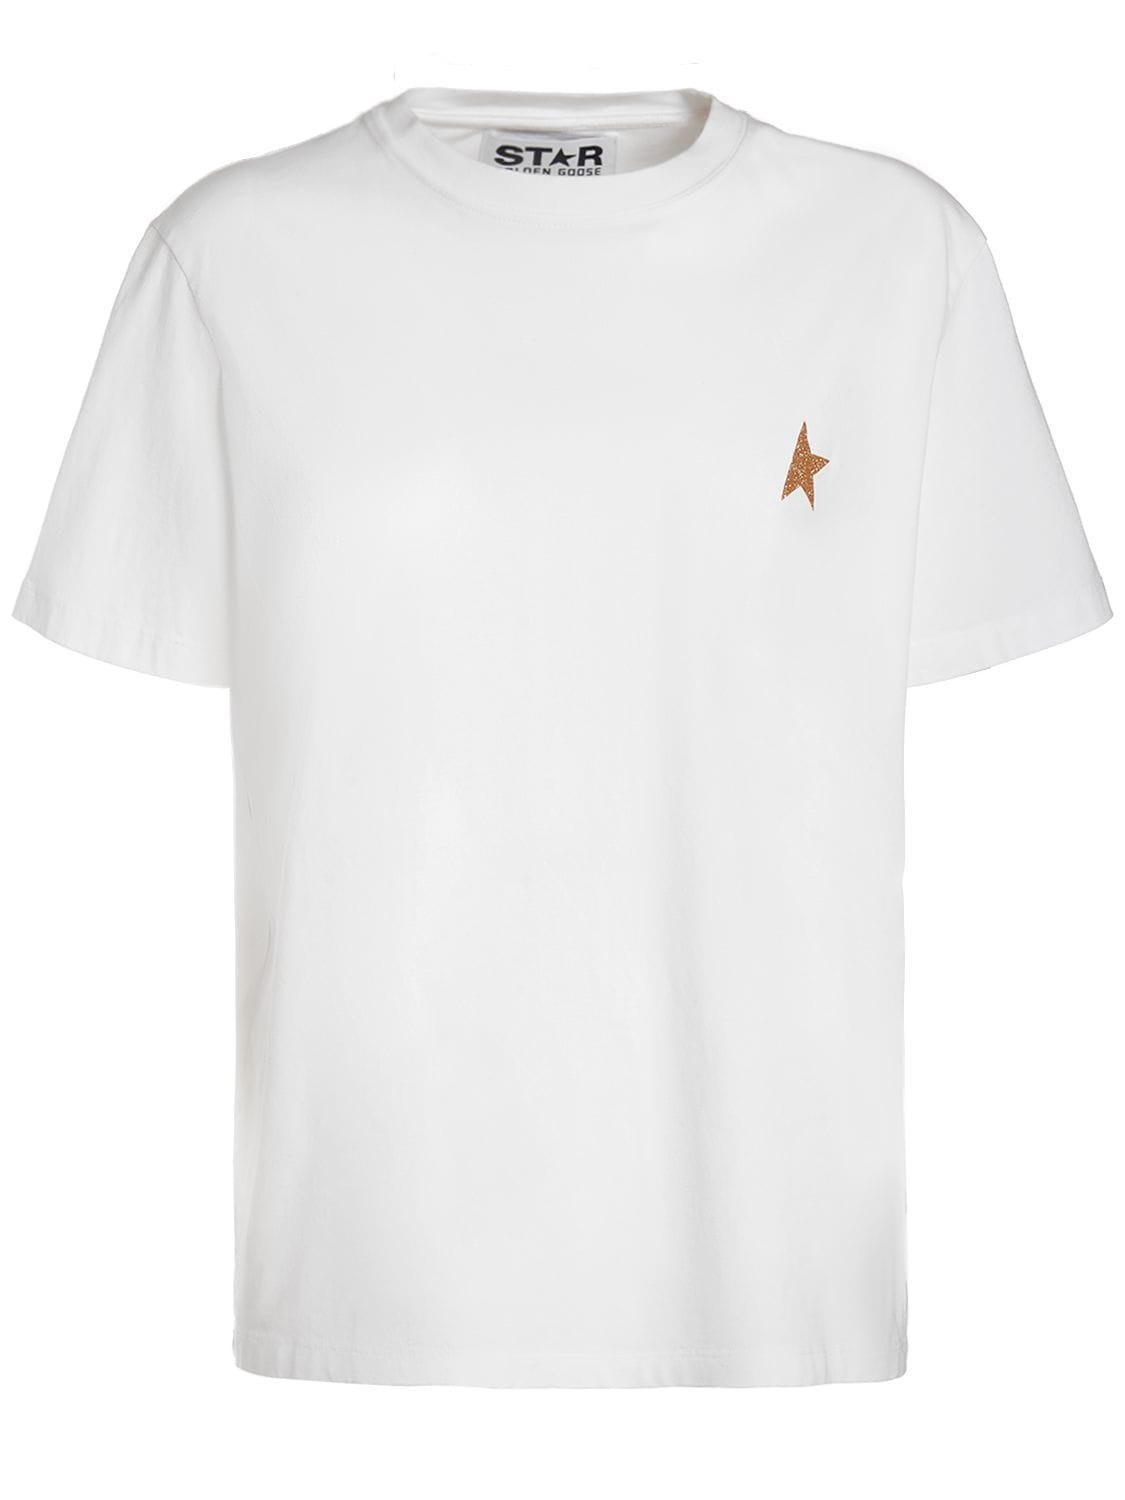 Image of Star Cotton Jersey T-shirt